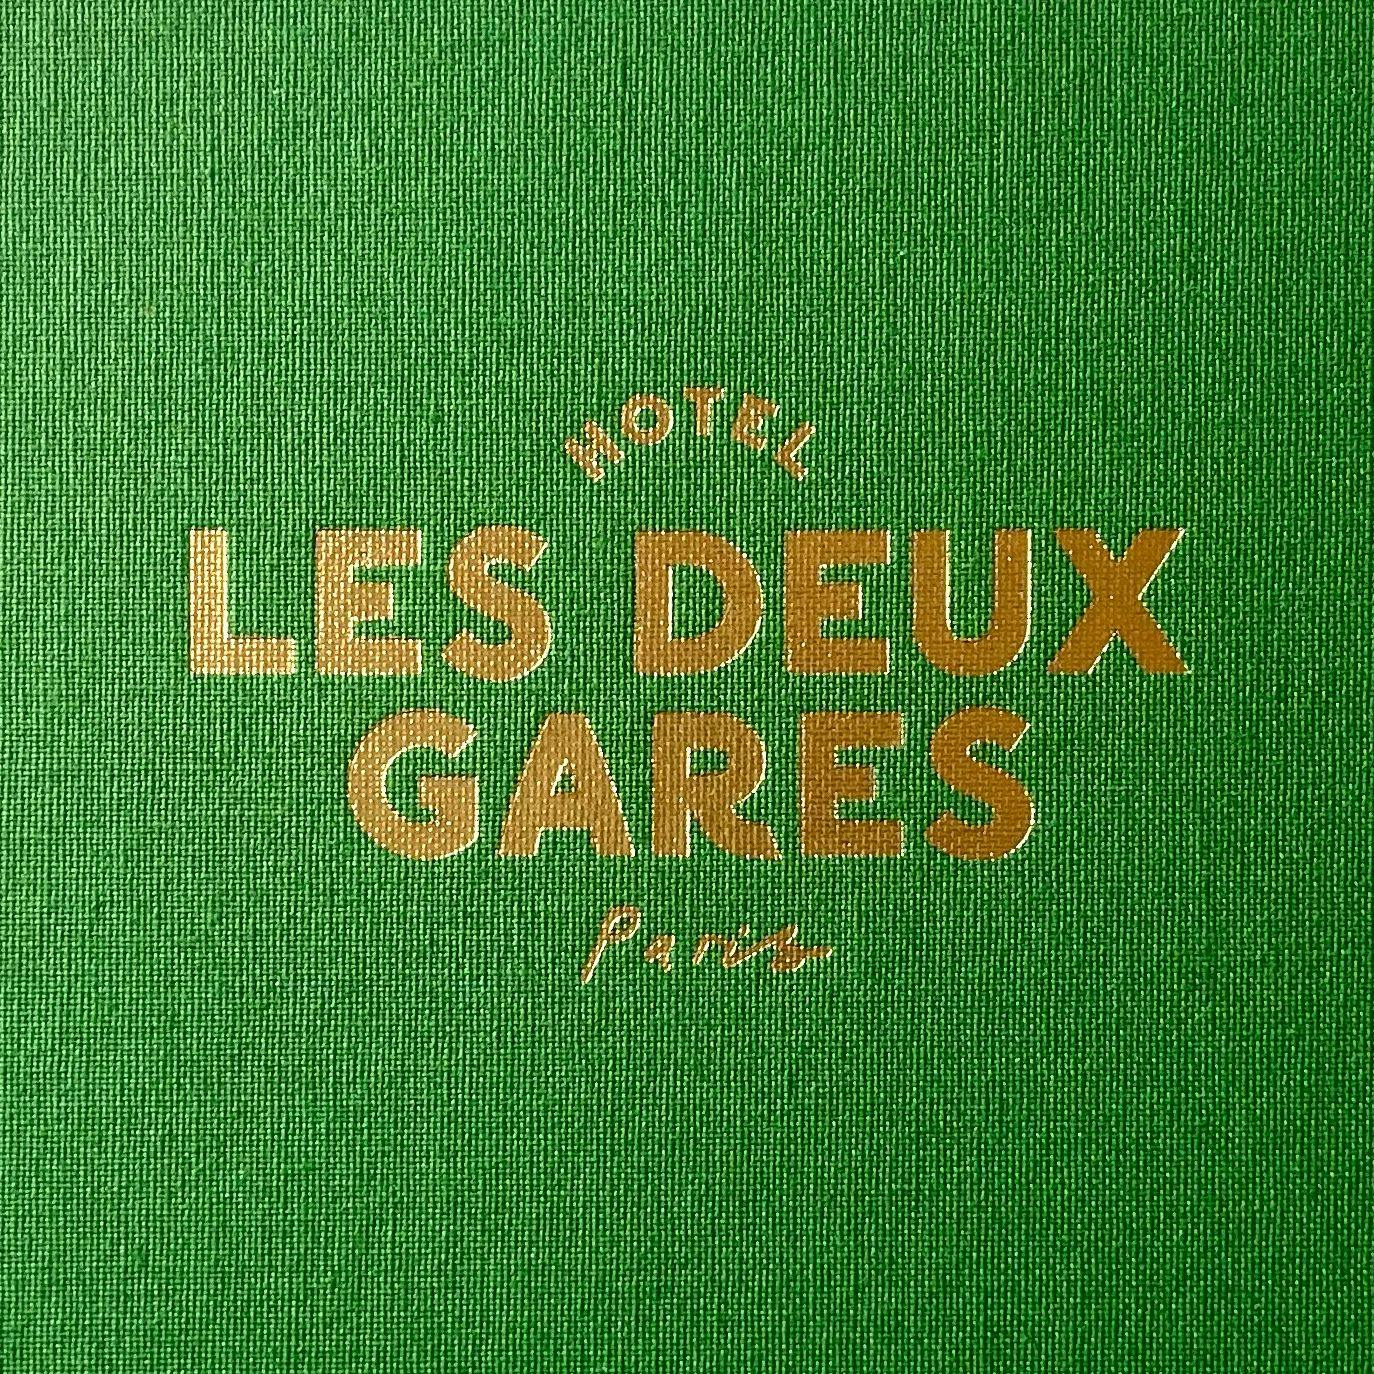 Image from Hotel Les Deux Gares